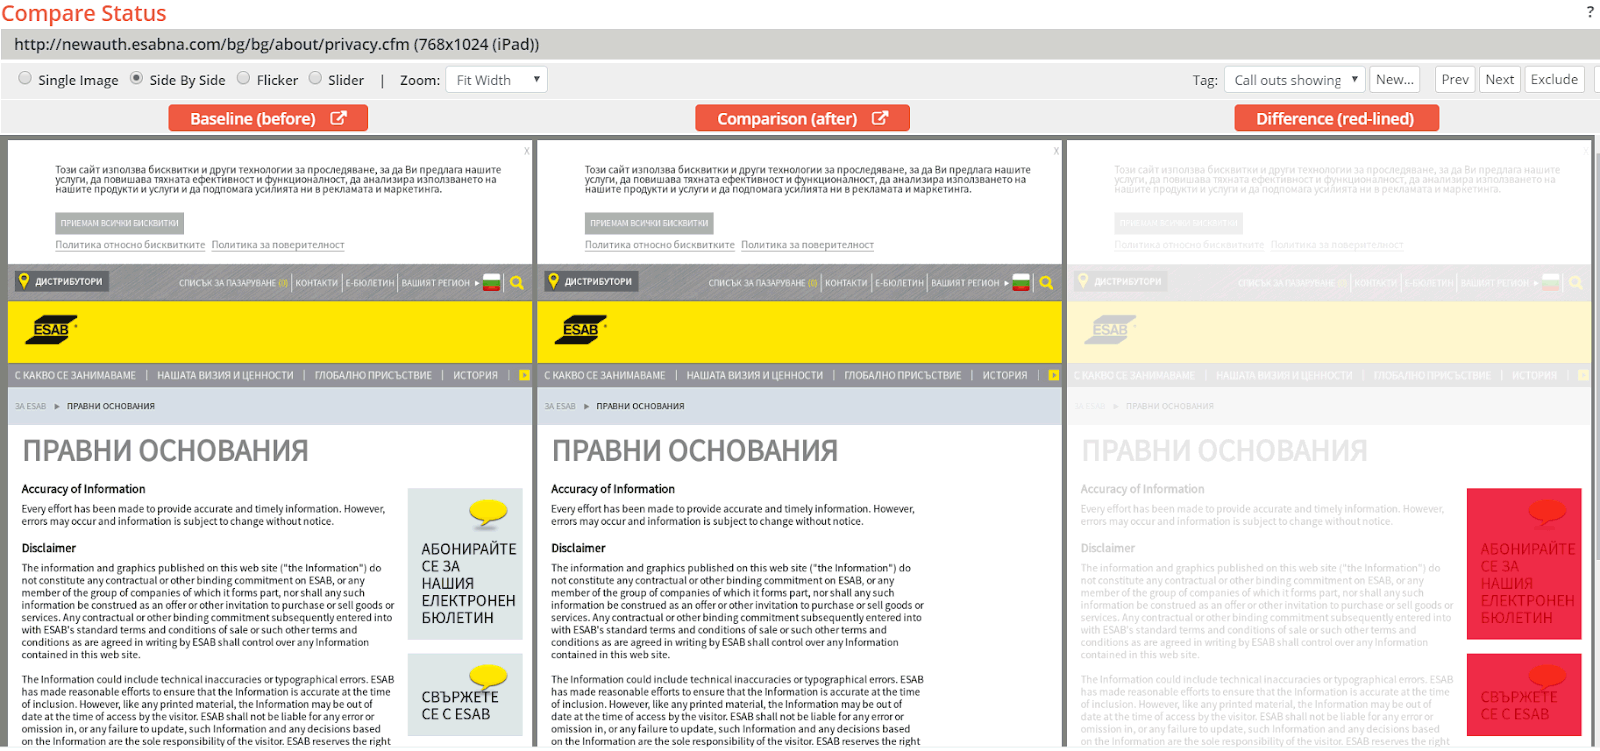 Bulgarian page where the light blue Call to Action callouts in the right-side column were missing